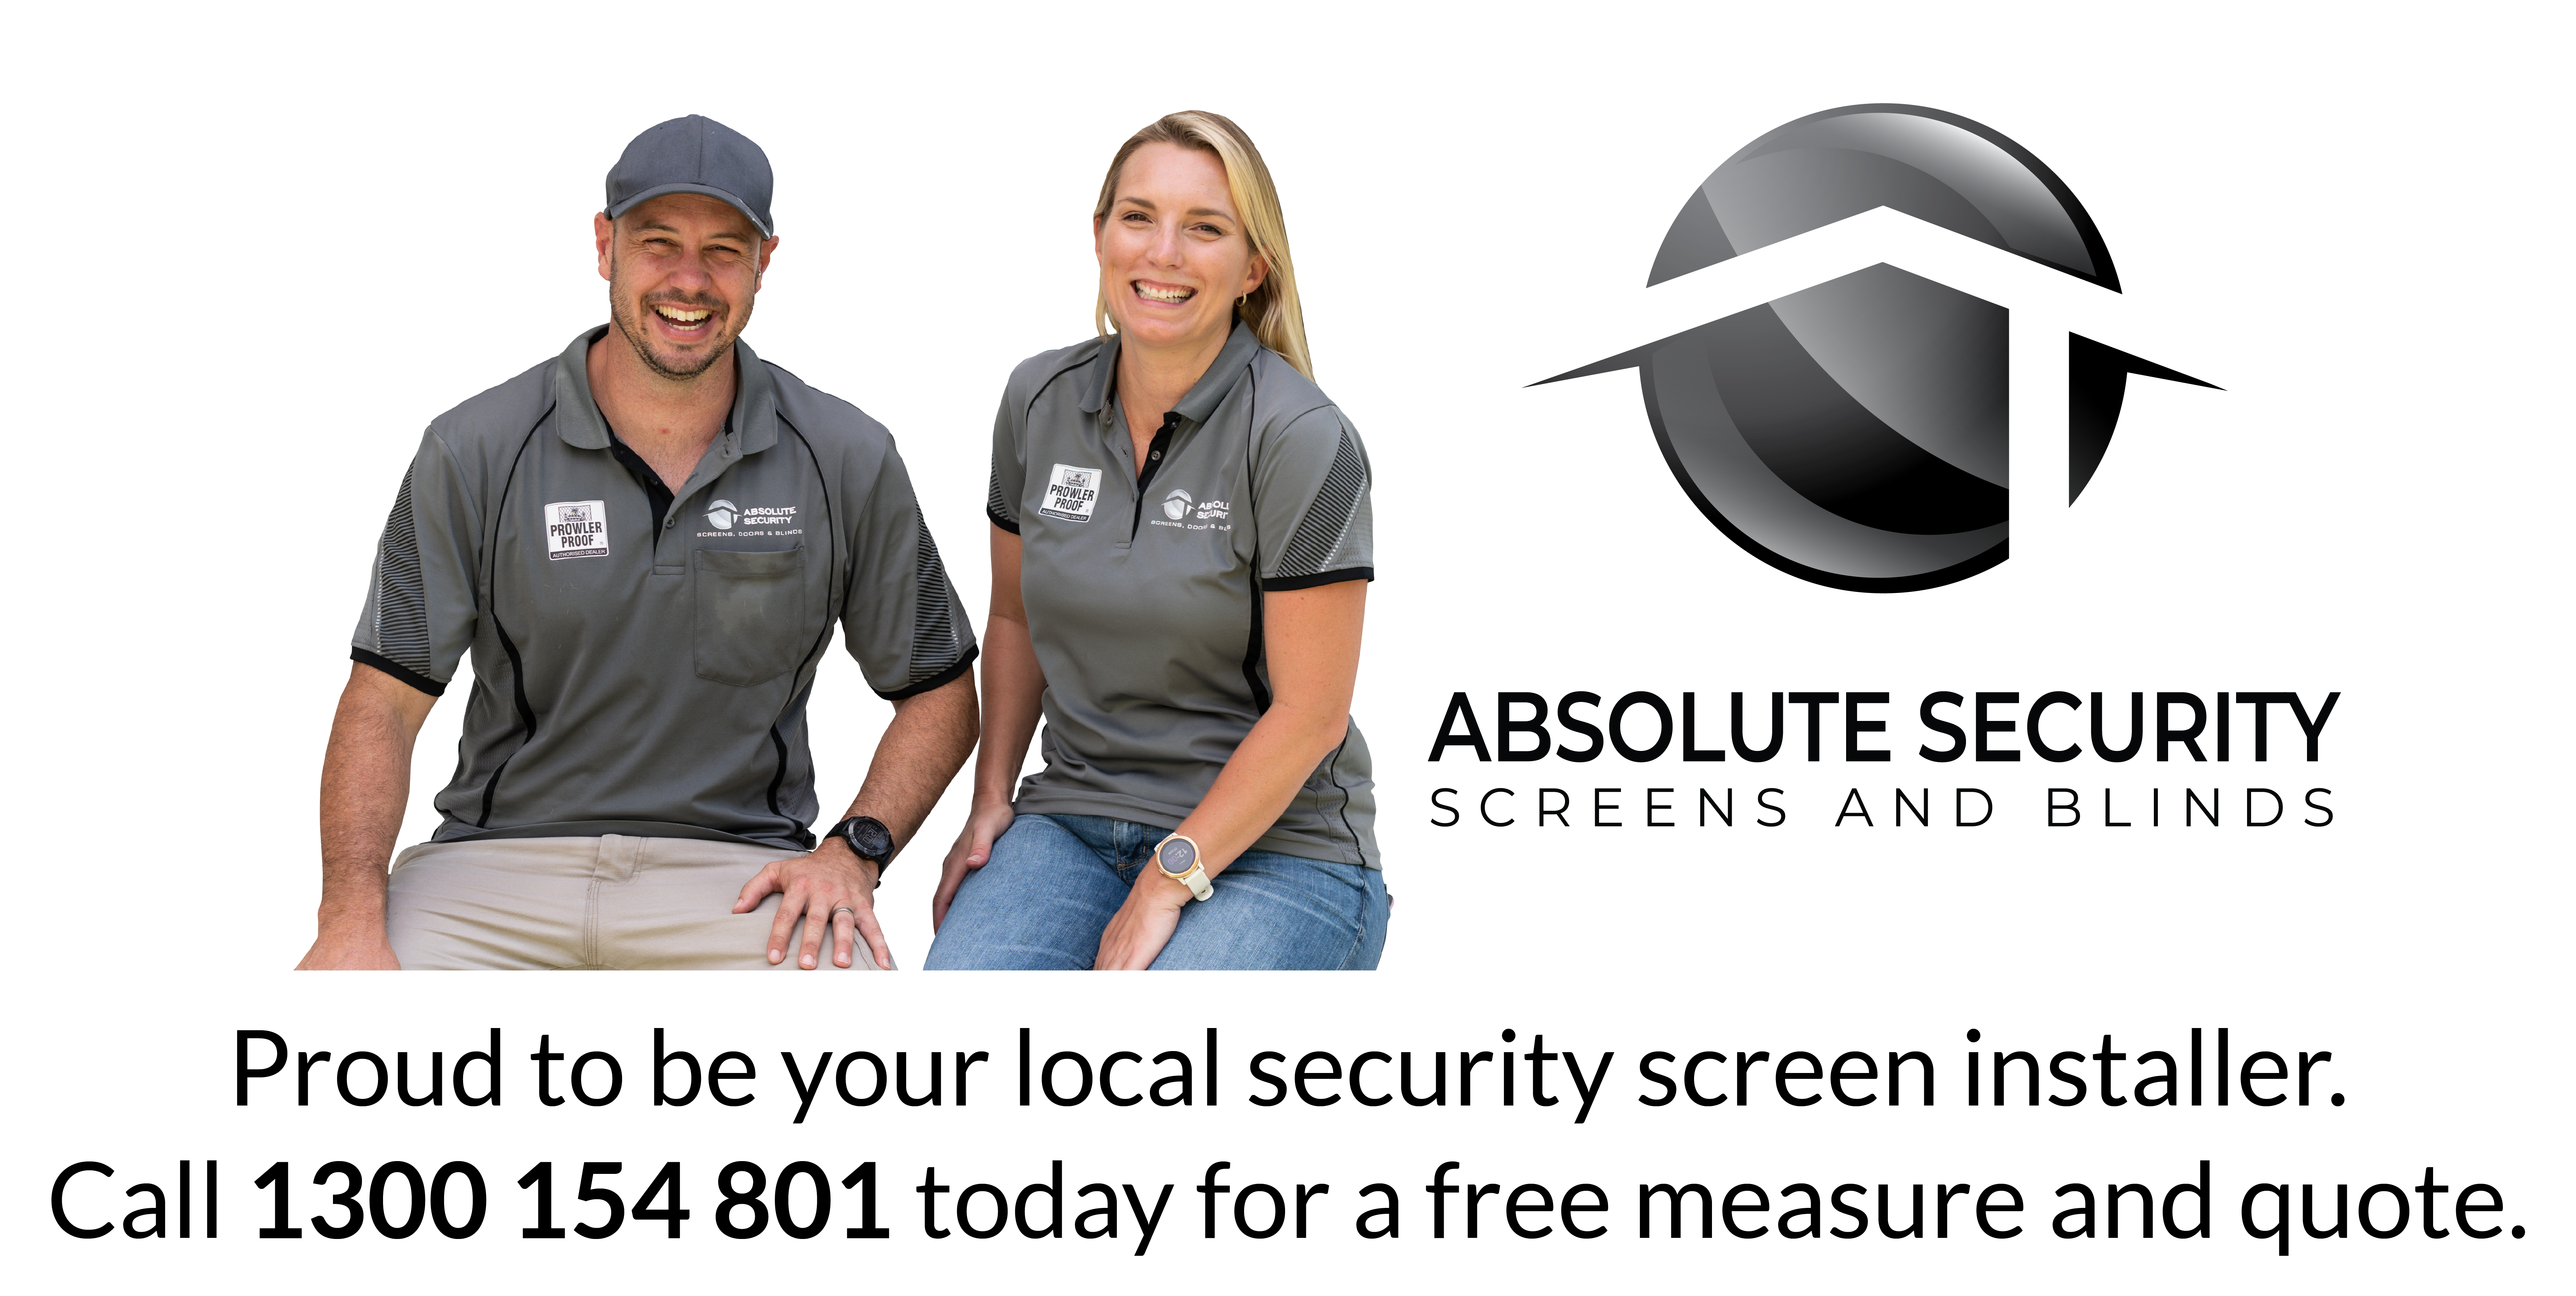 Absolute Security owners with logo, Prowler Proof certified dealer